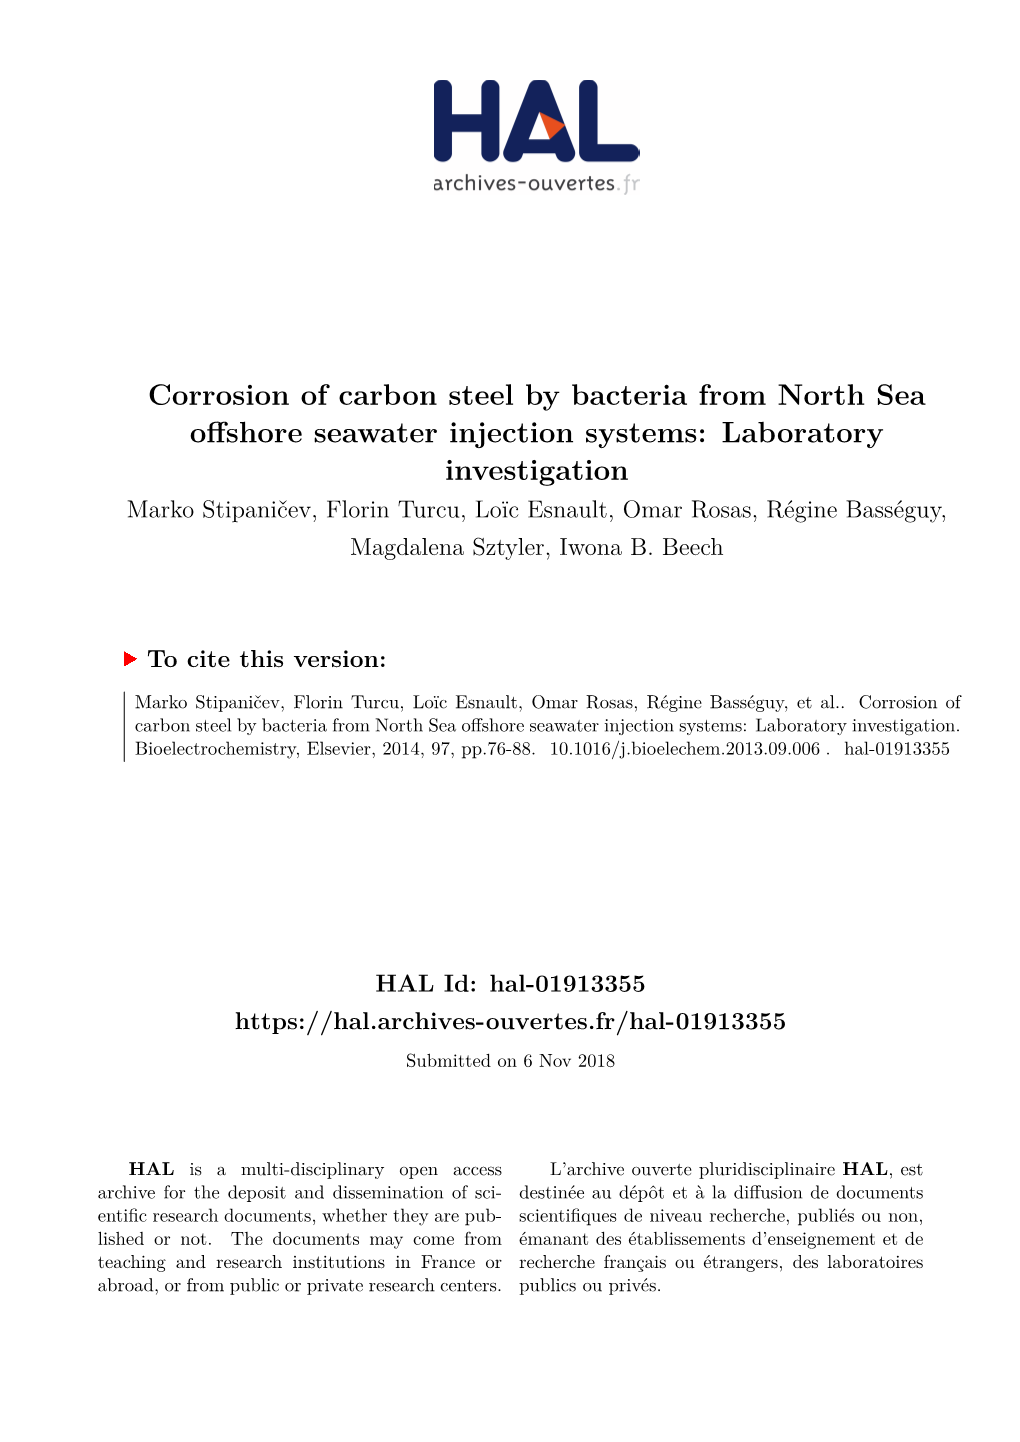 Corrosion of Carbon Steel by Bacteria from North